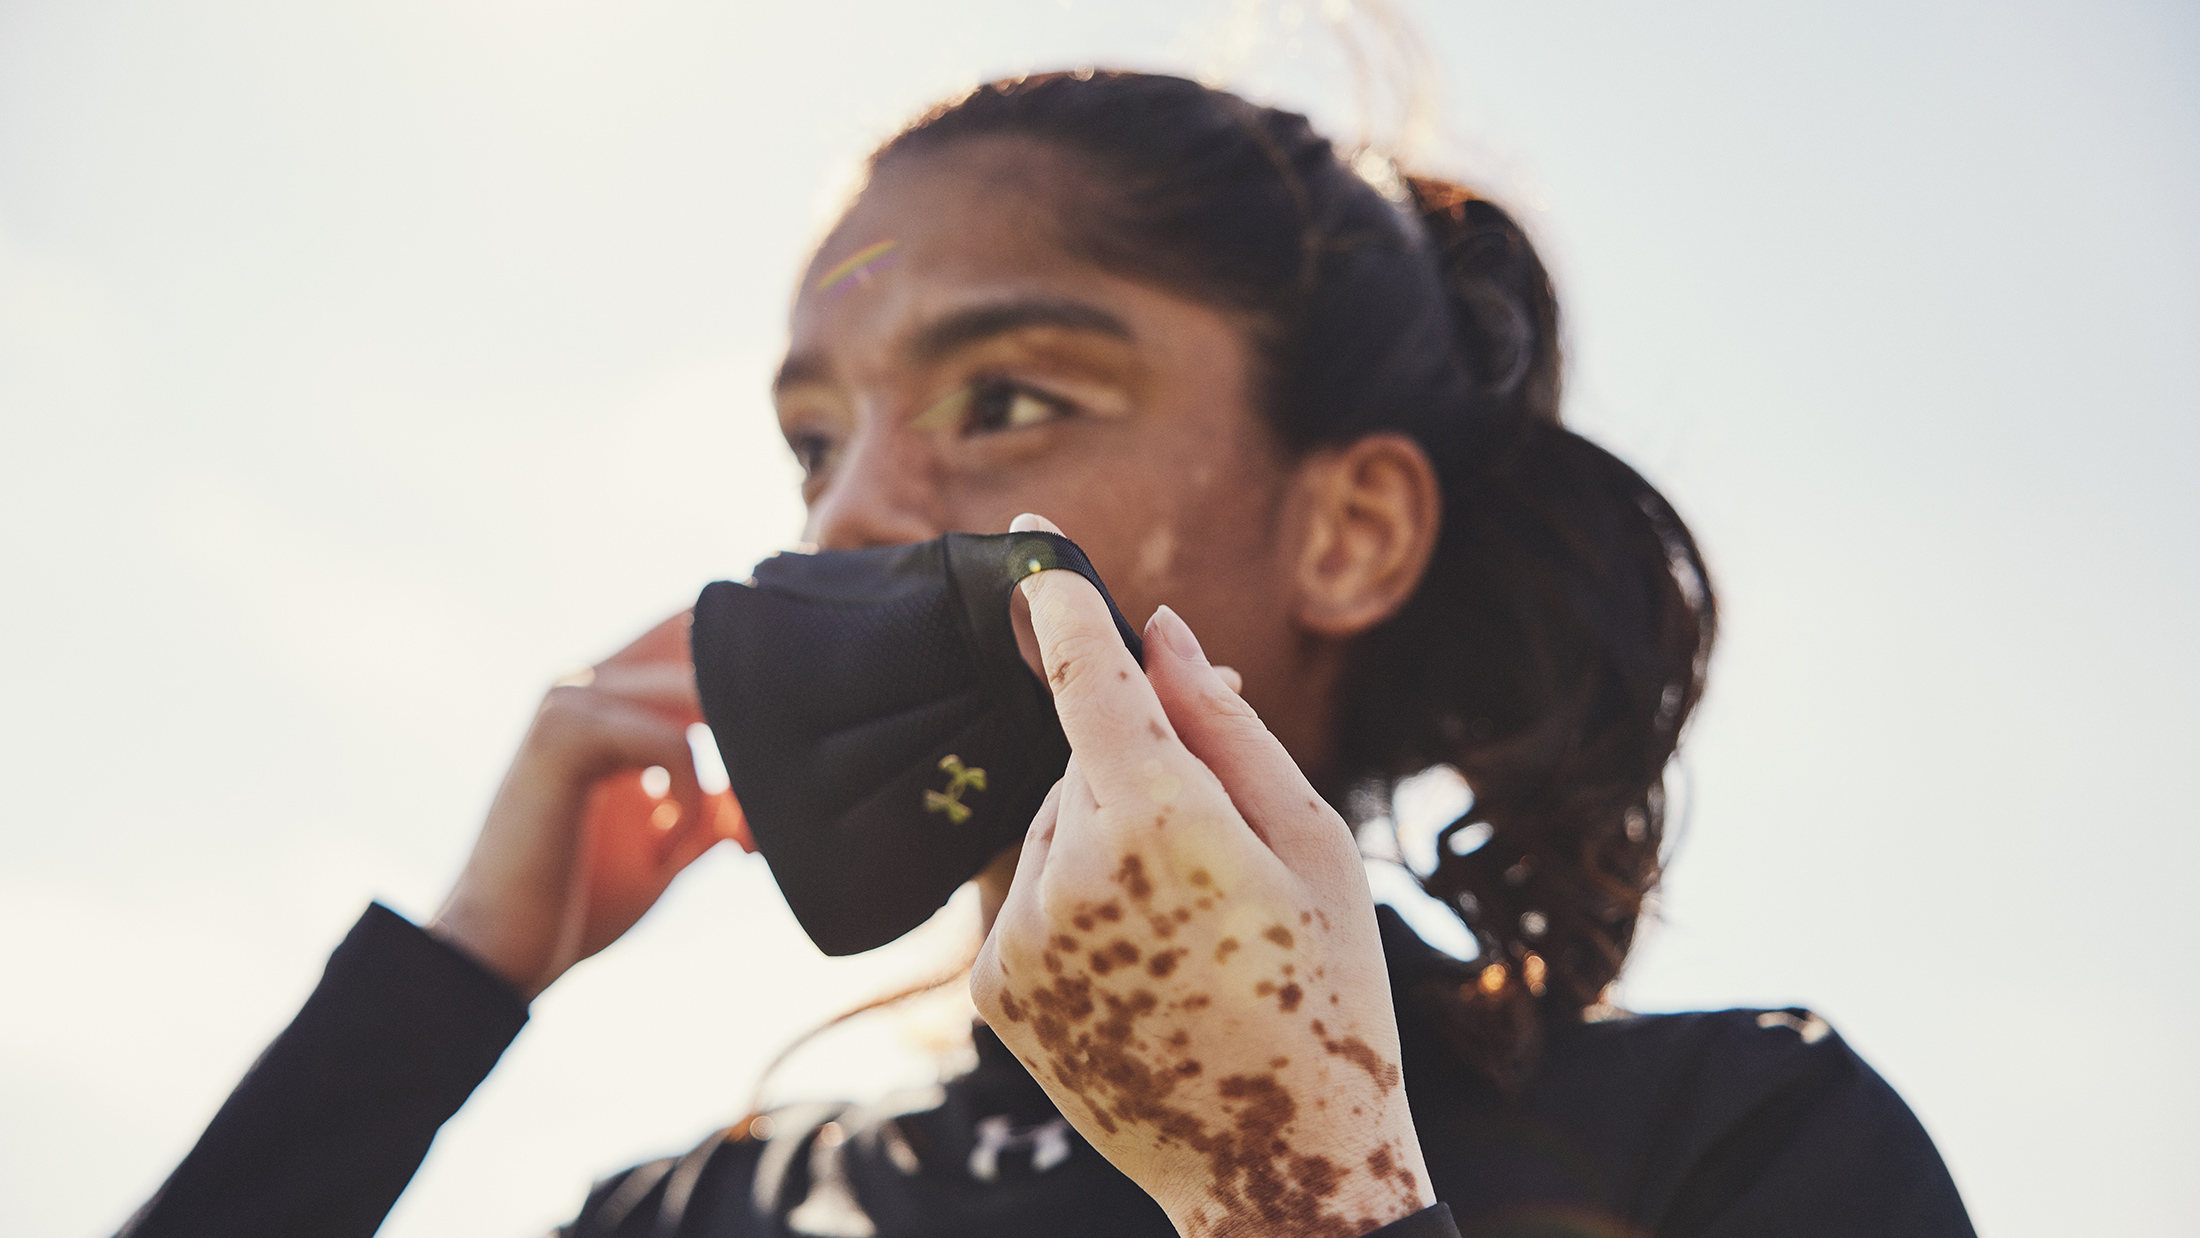 Sportsmask | Aaron Cobb Commercial Photography